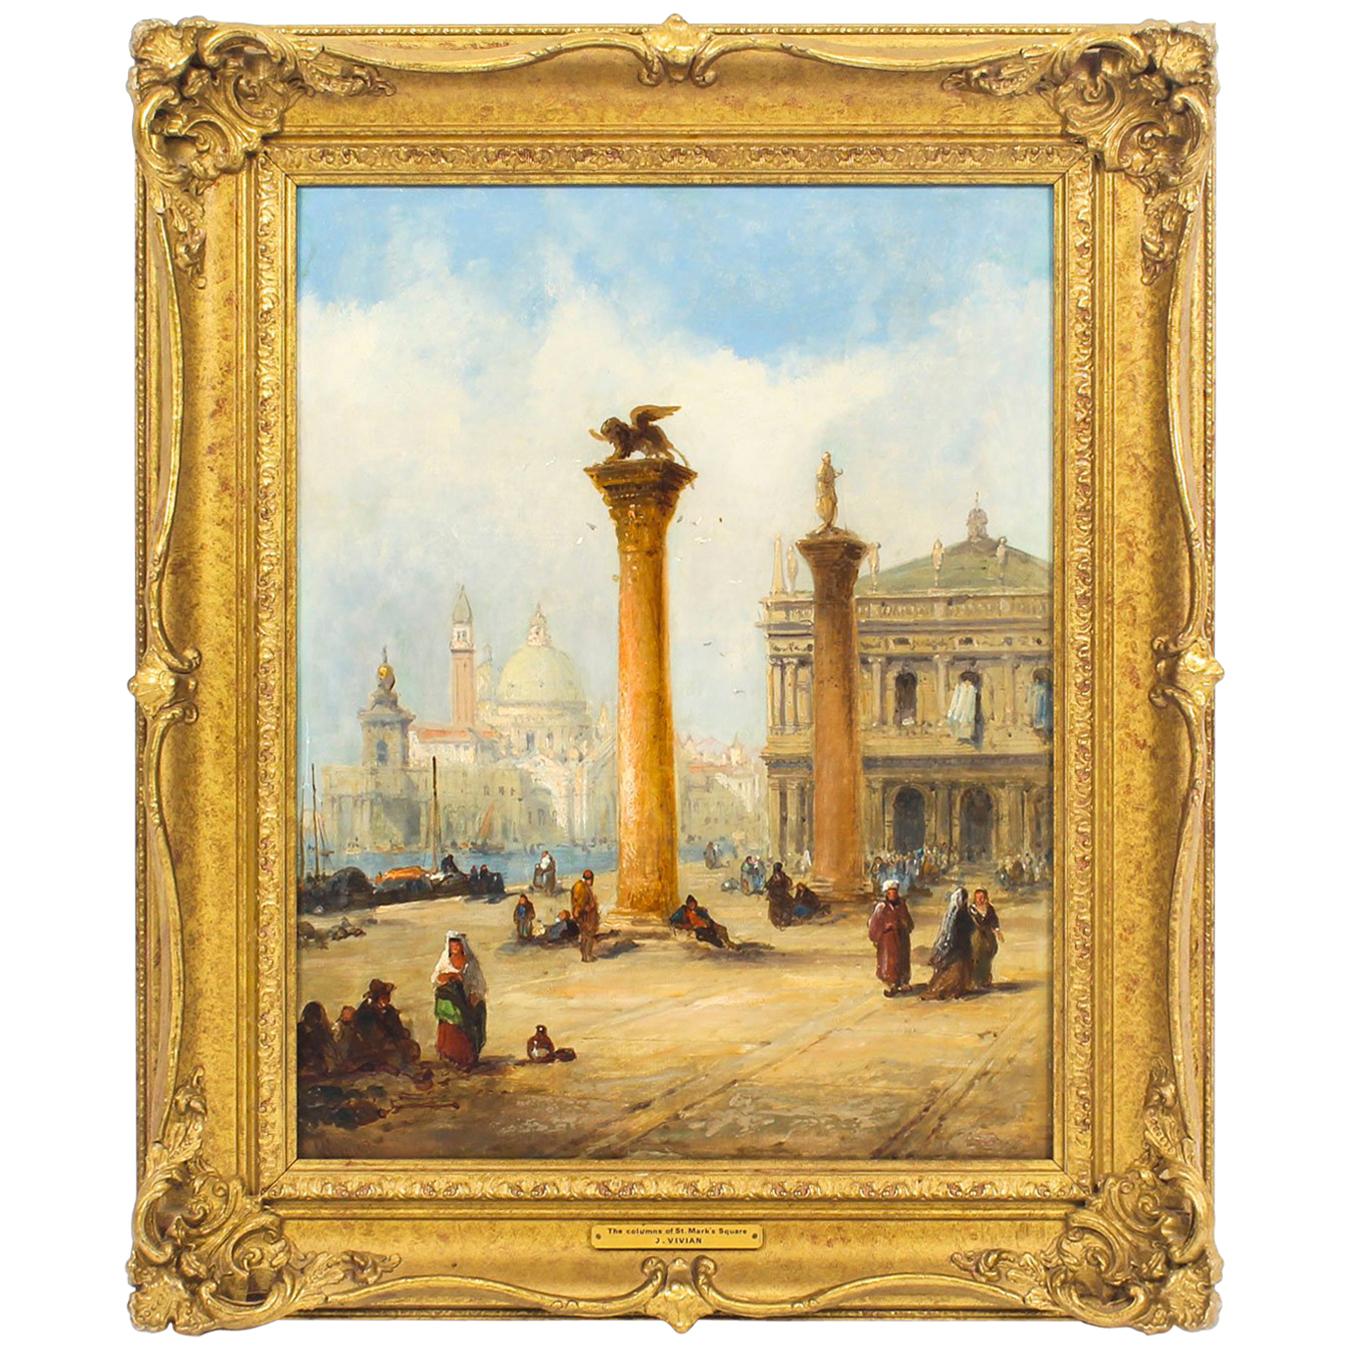 Antique Oil Painting The Columns of St. Marks Square J.Vivian, 19th Century